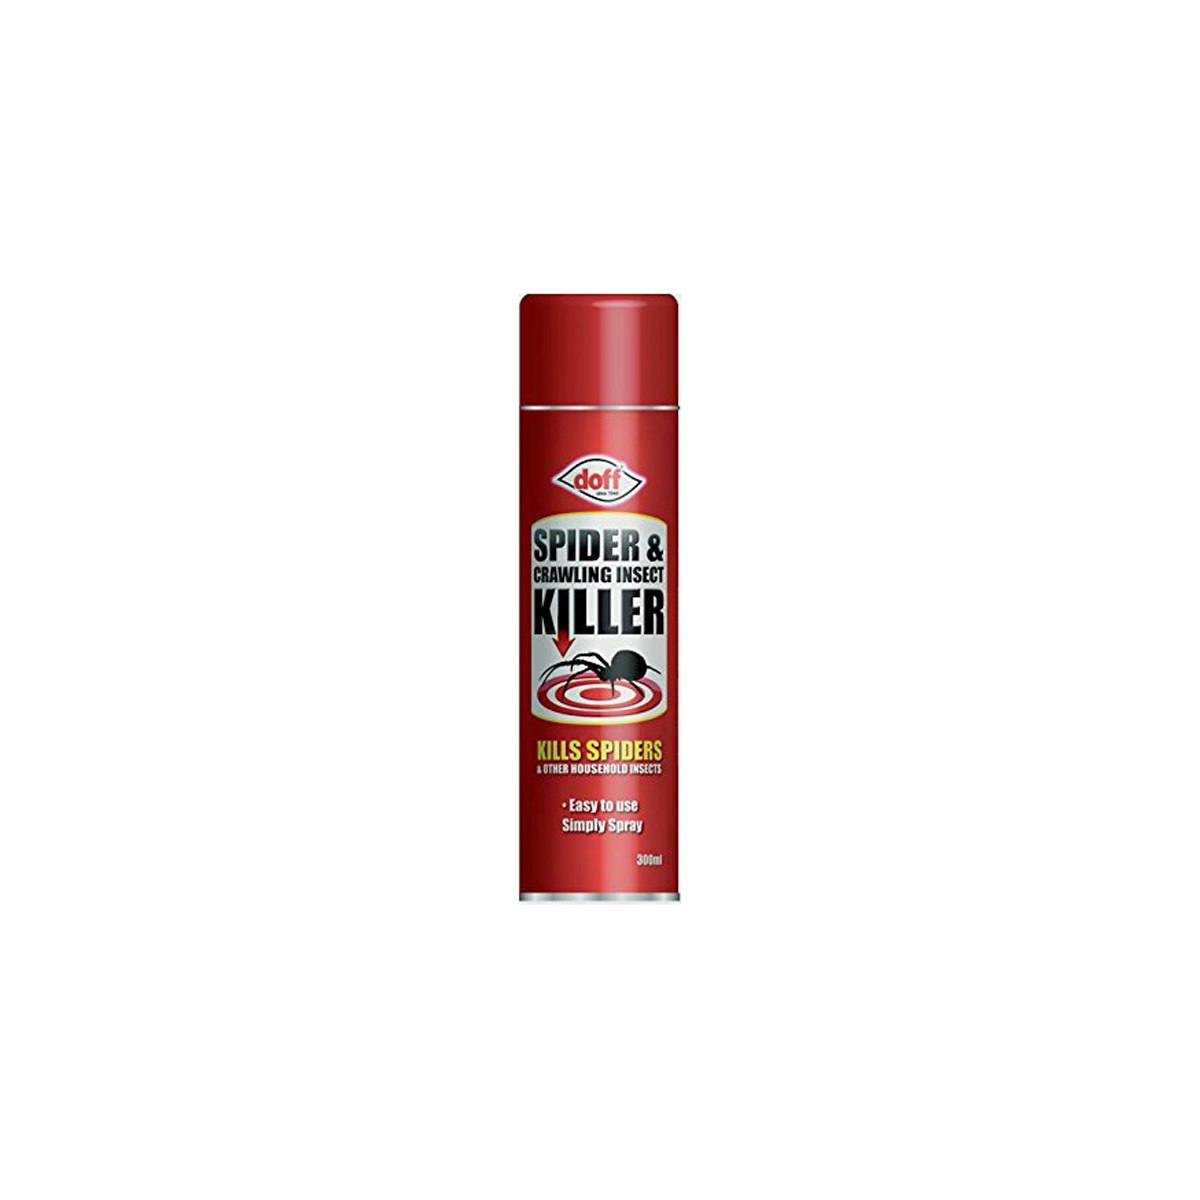 Doff Spider and Crawling Insect Killer Spray 300ml